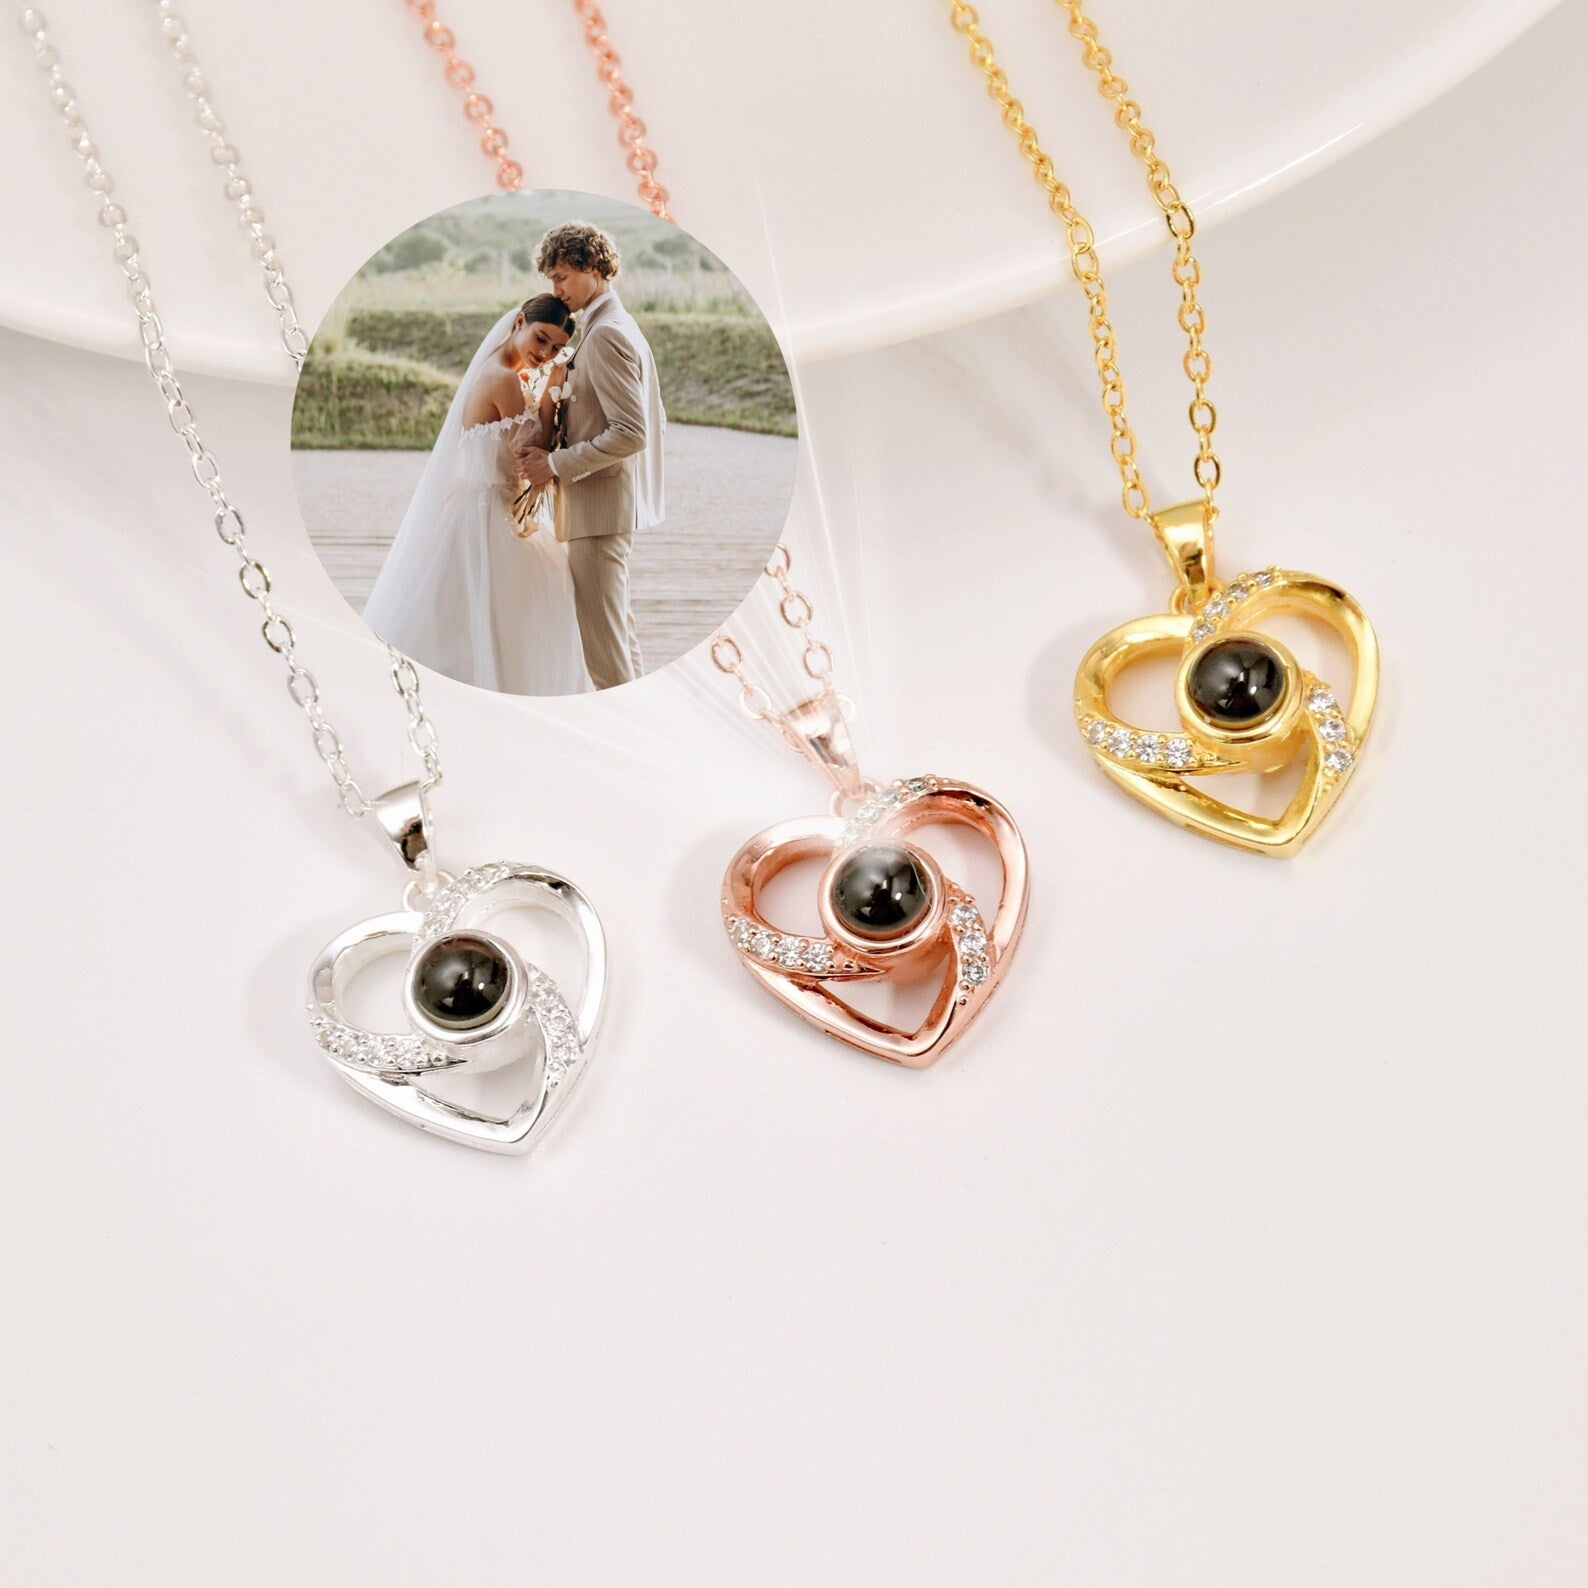 Personalised Memorial Photo Projection Necklace - RoseFeels UK